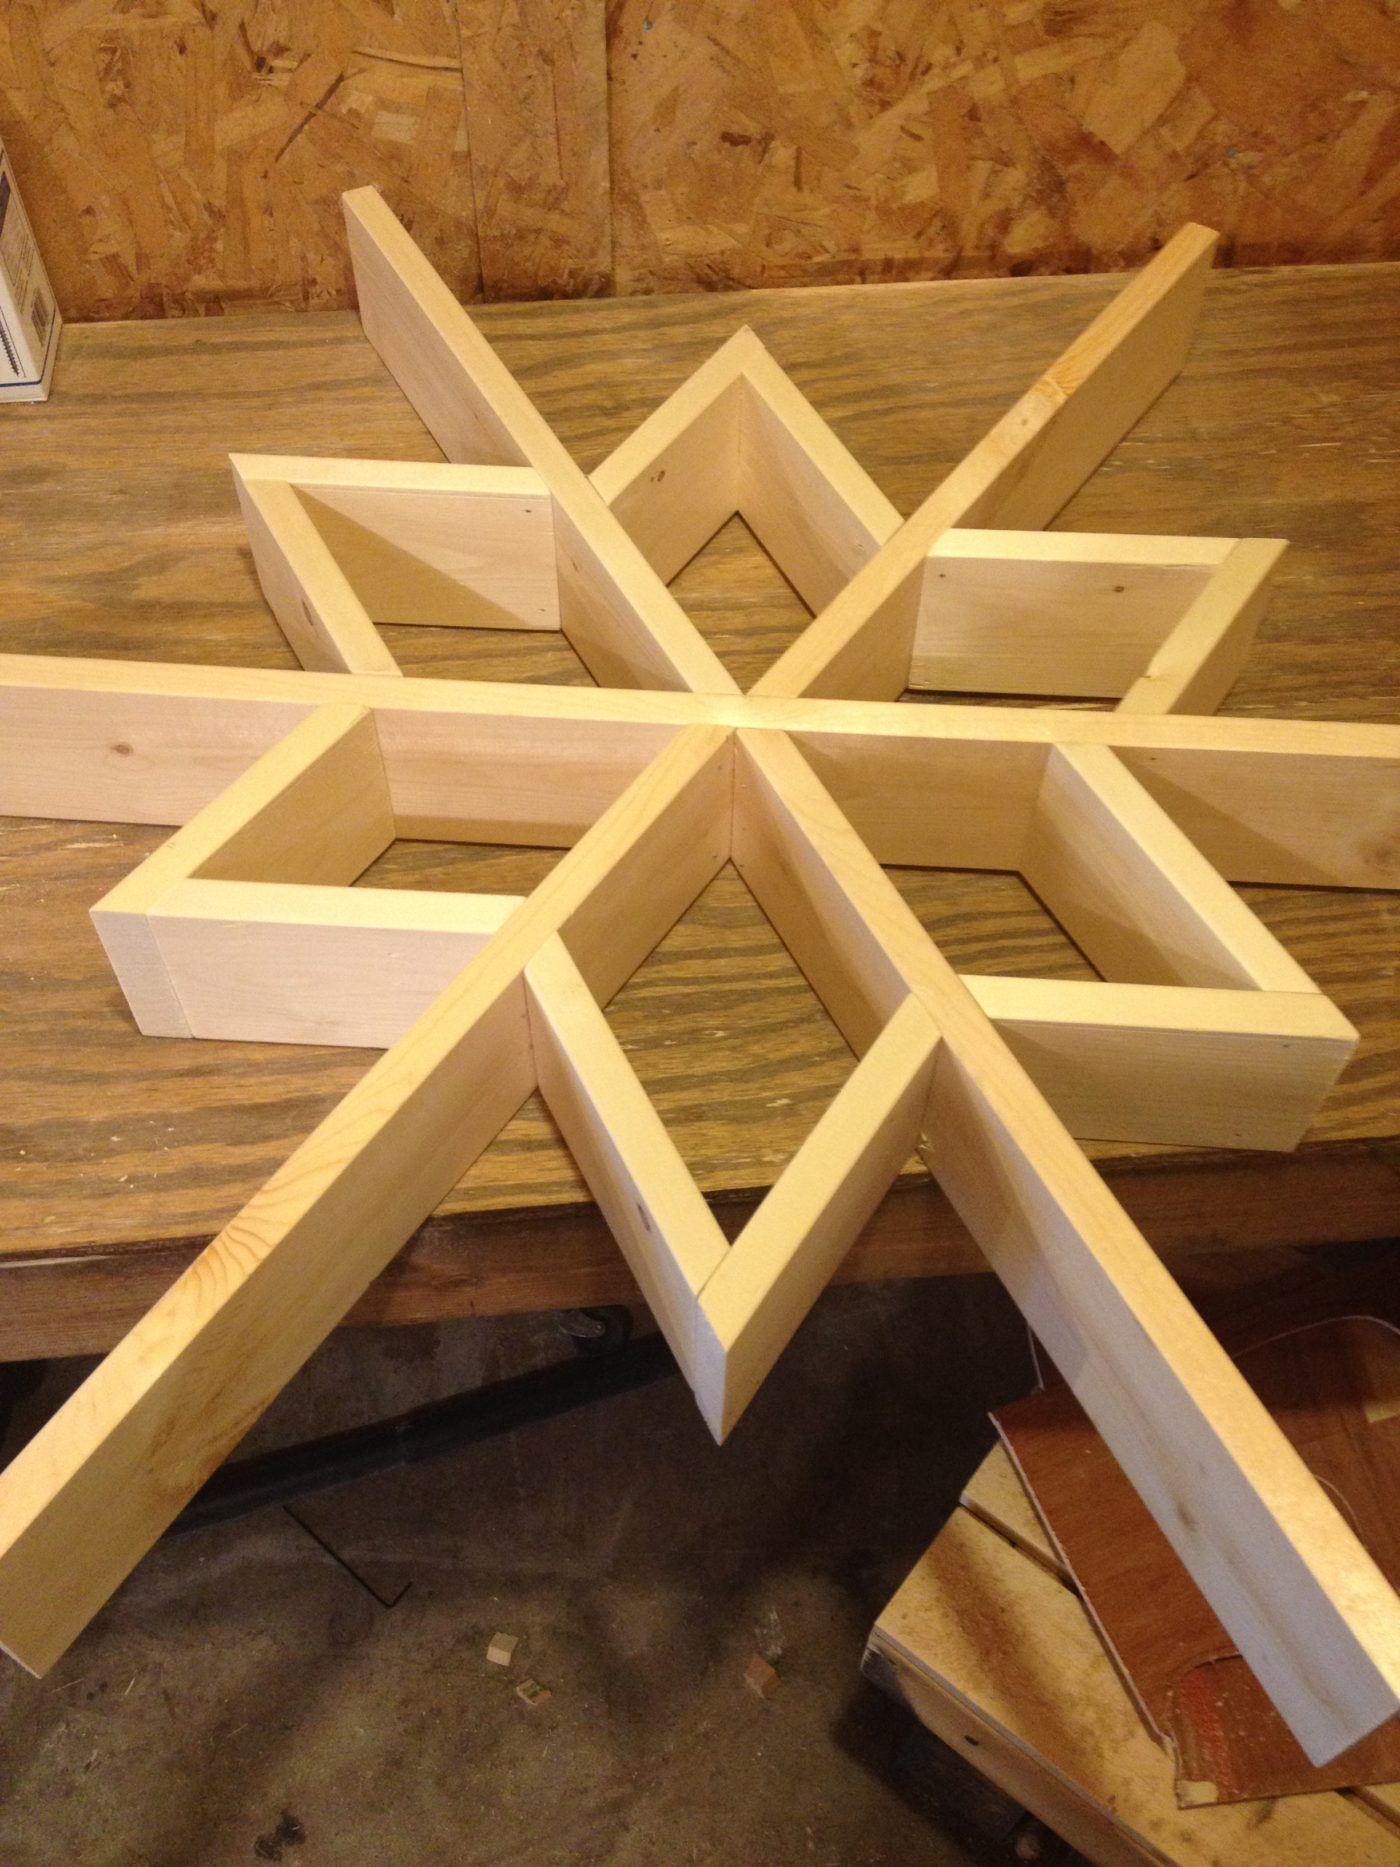 wall shelf assembly in progress--triangles attached to main frame